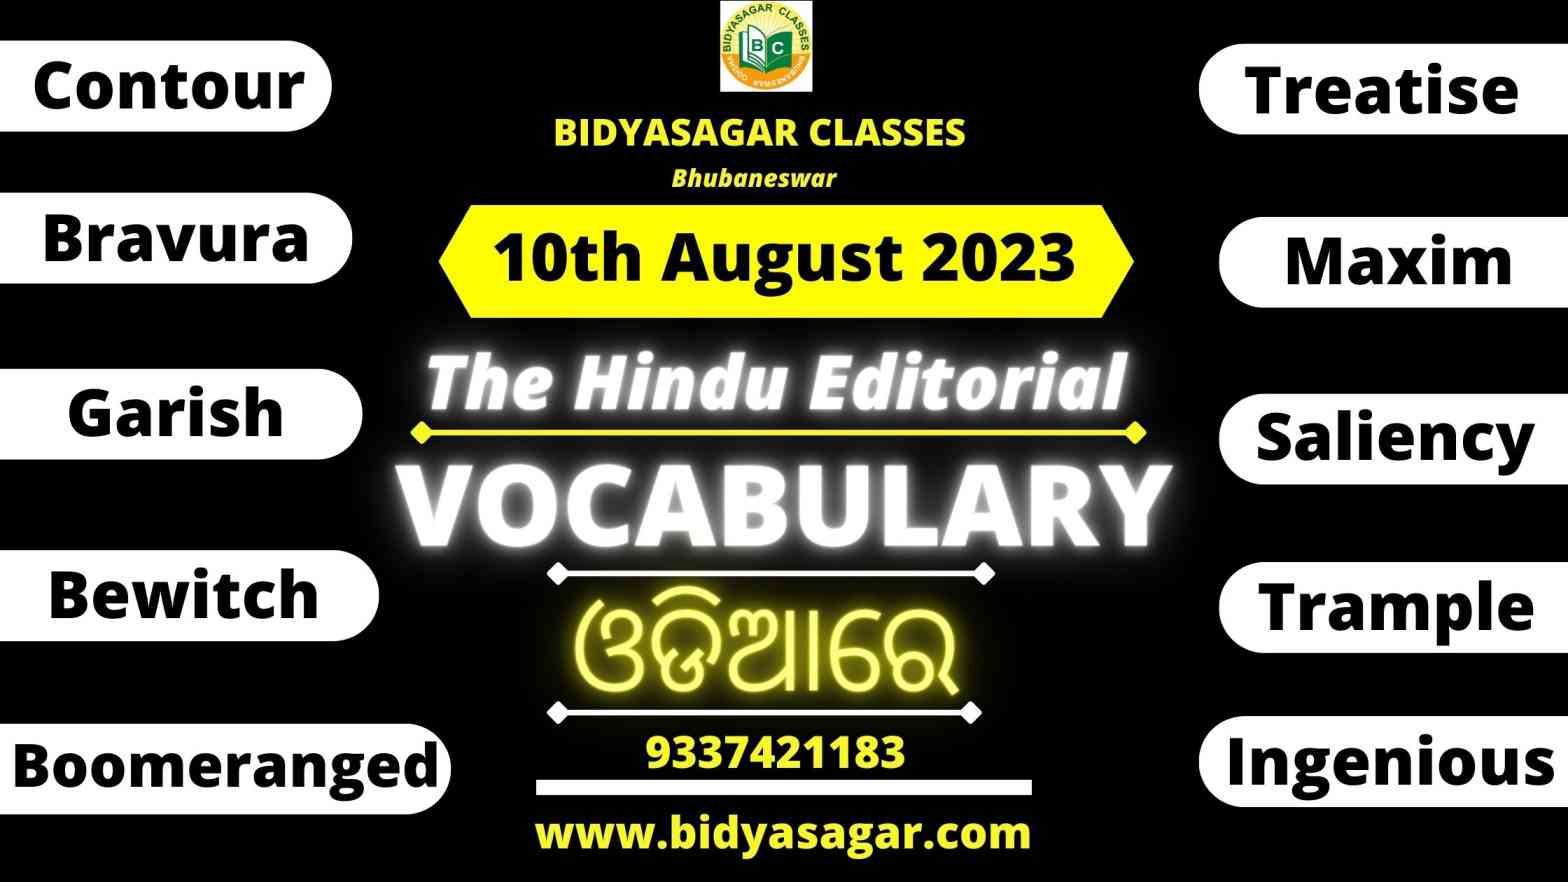 The Hindu Editorial Vocabulary of 10th August 2023